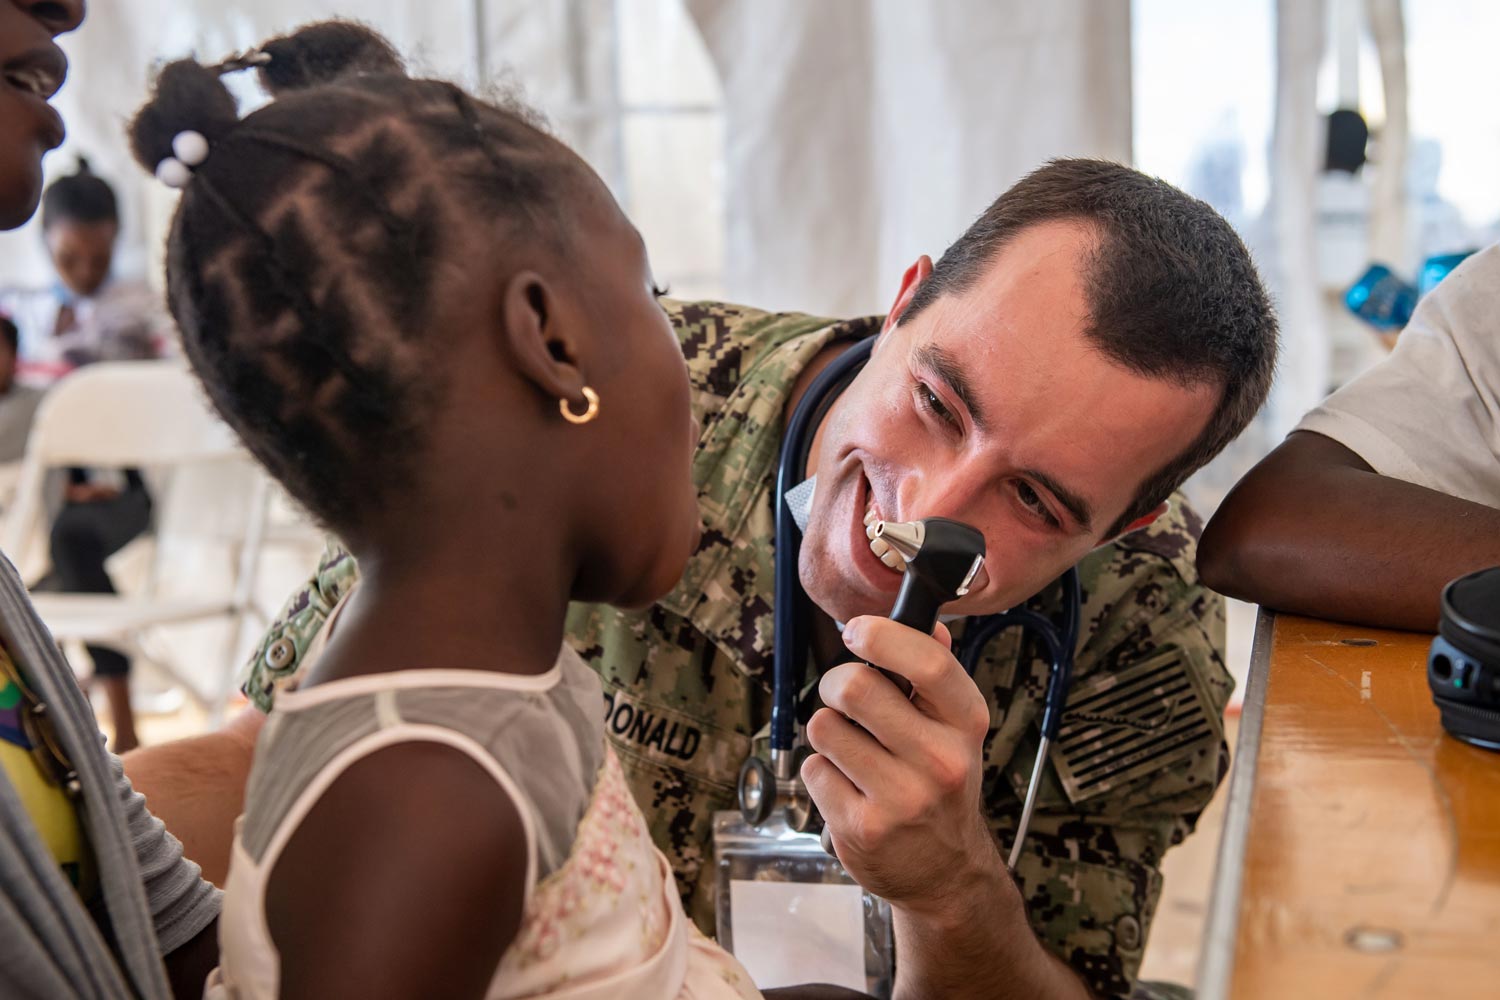 A smiling navy doctor checks a young patient.